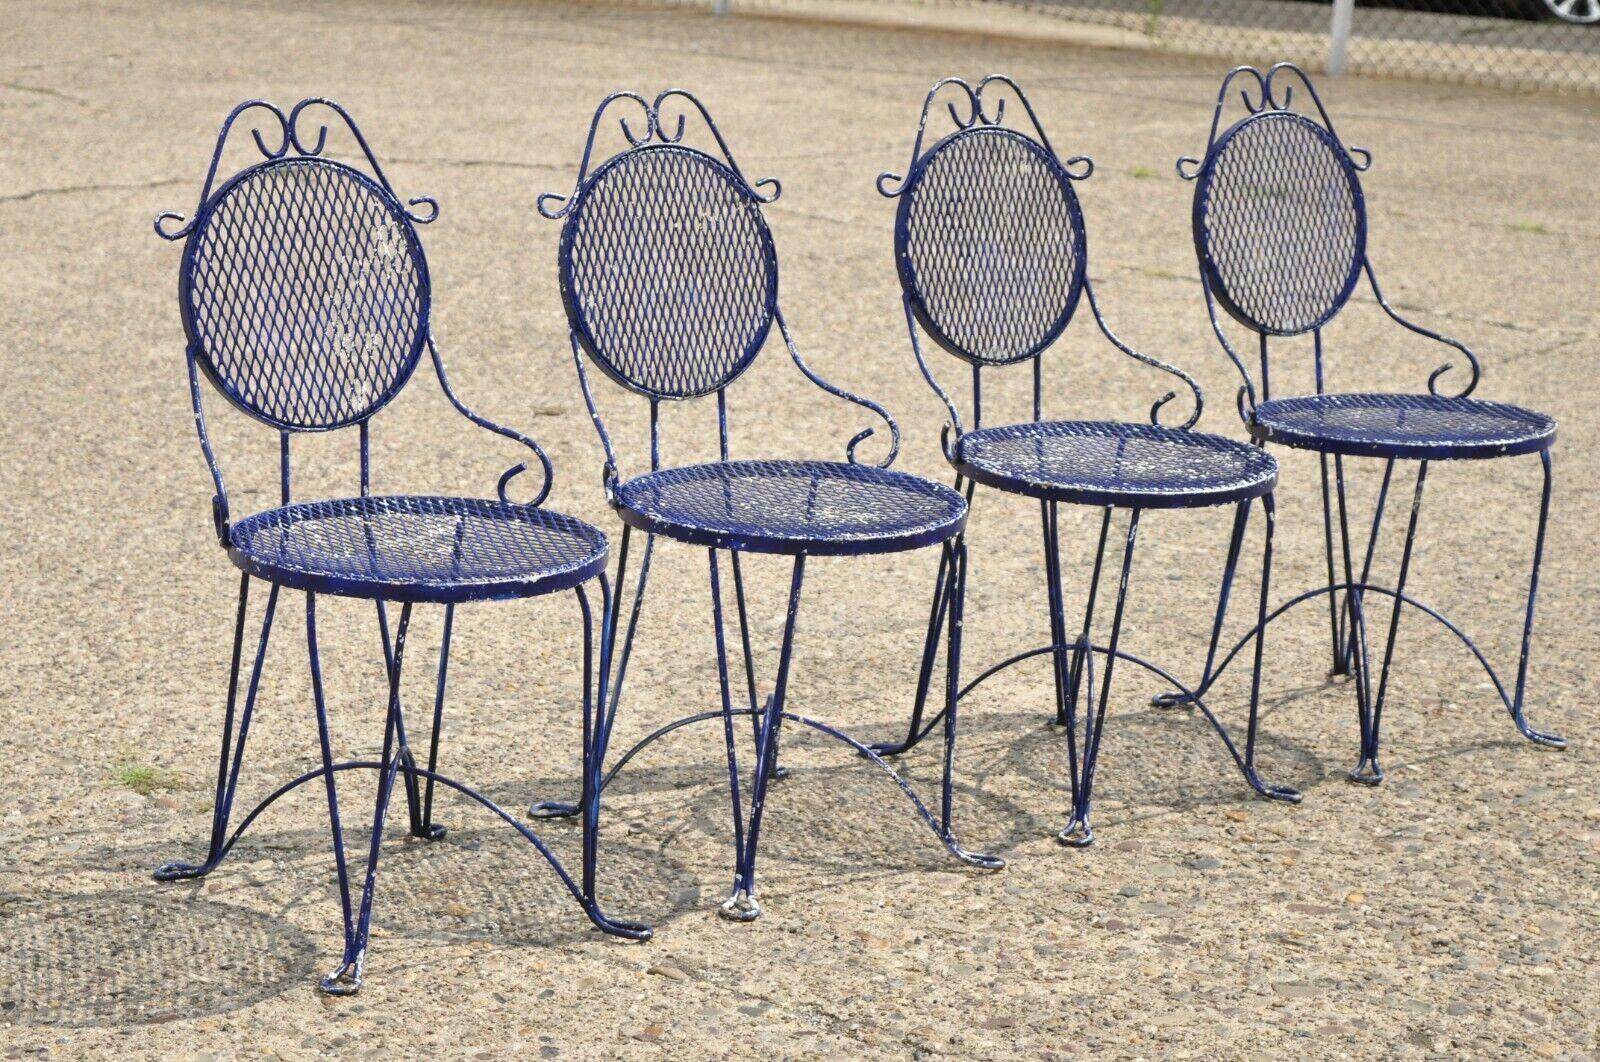 Small Vintage French Victorian Style Blue Wrought Iron Garden Bistro dining chairs - Set of 4. Item features mesh seats and backs, wrought iron construction, distressed finish, great style and form. Circa Mid 20th Century. Measurements: 32.5